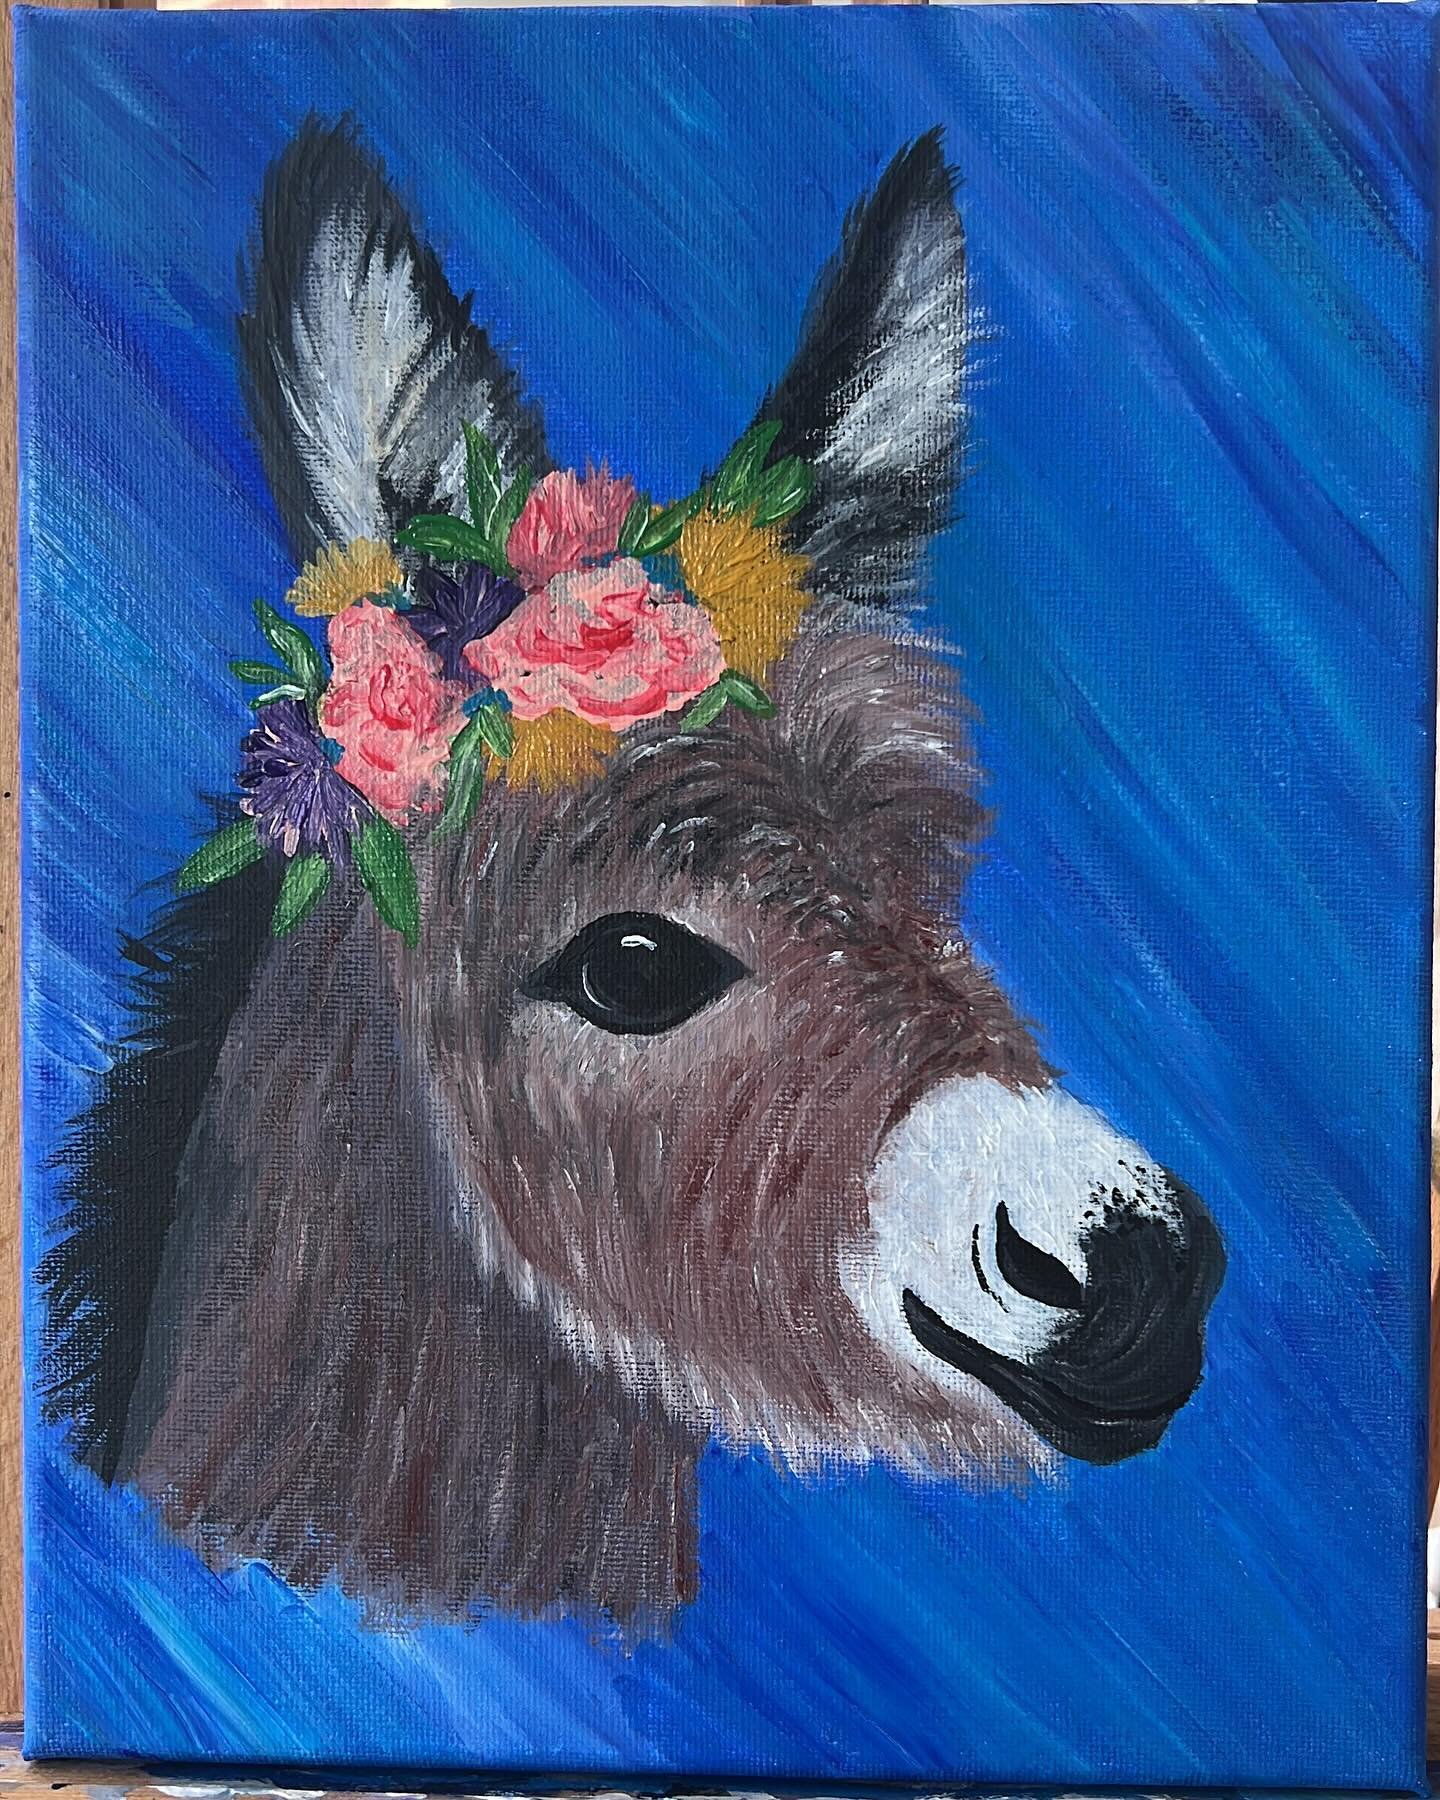 *PRETTY DONKEY ALERT 🚨 *
-
I asked the question the other day as to what animal I should paint onto the blue background, and with a variety of answers I went with something that I haven&rsquo;t painted yet - a cute little donkey with some flowers in